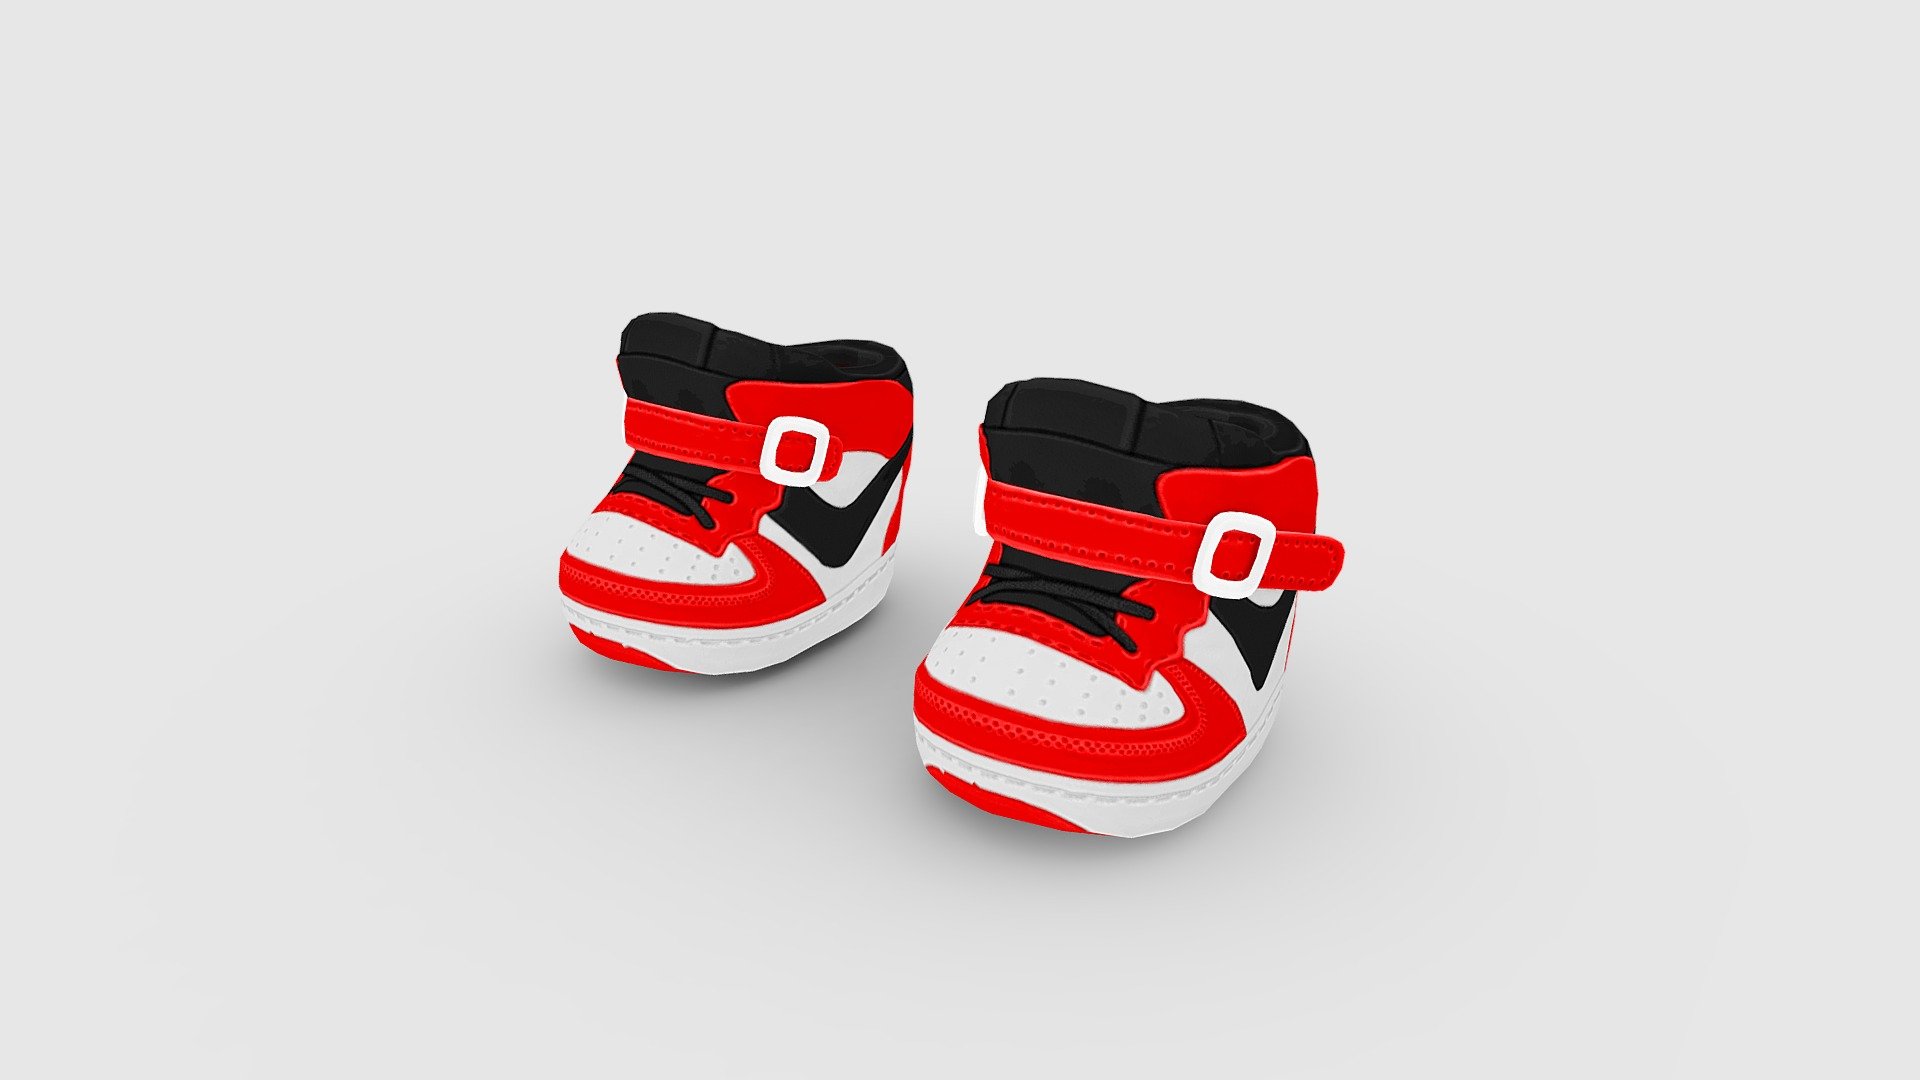 Cartoon baby shoes - red and black sneakers Low-poly 3D model - Cartoon baby shoes - red and black sneakers - 3D model by ler_cartoon (@lerrrrr) 3d model